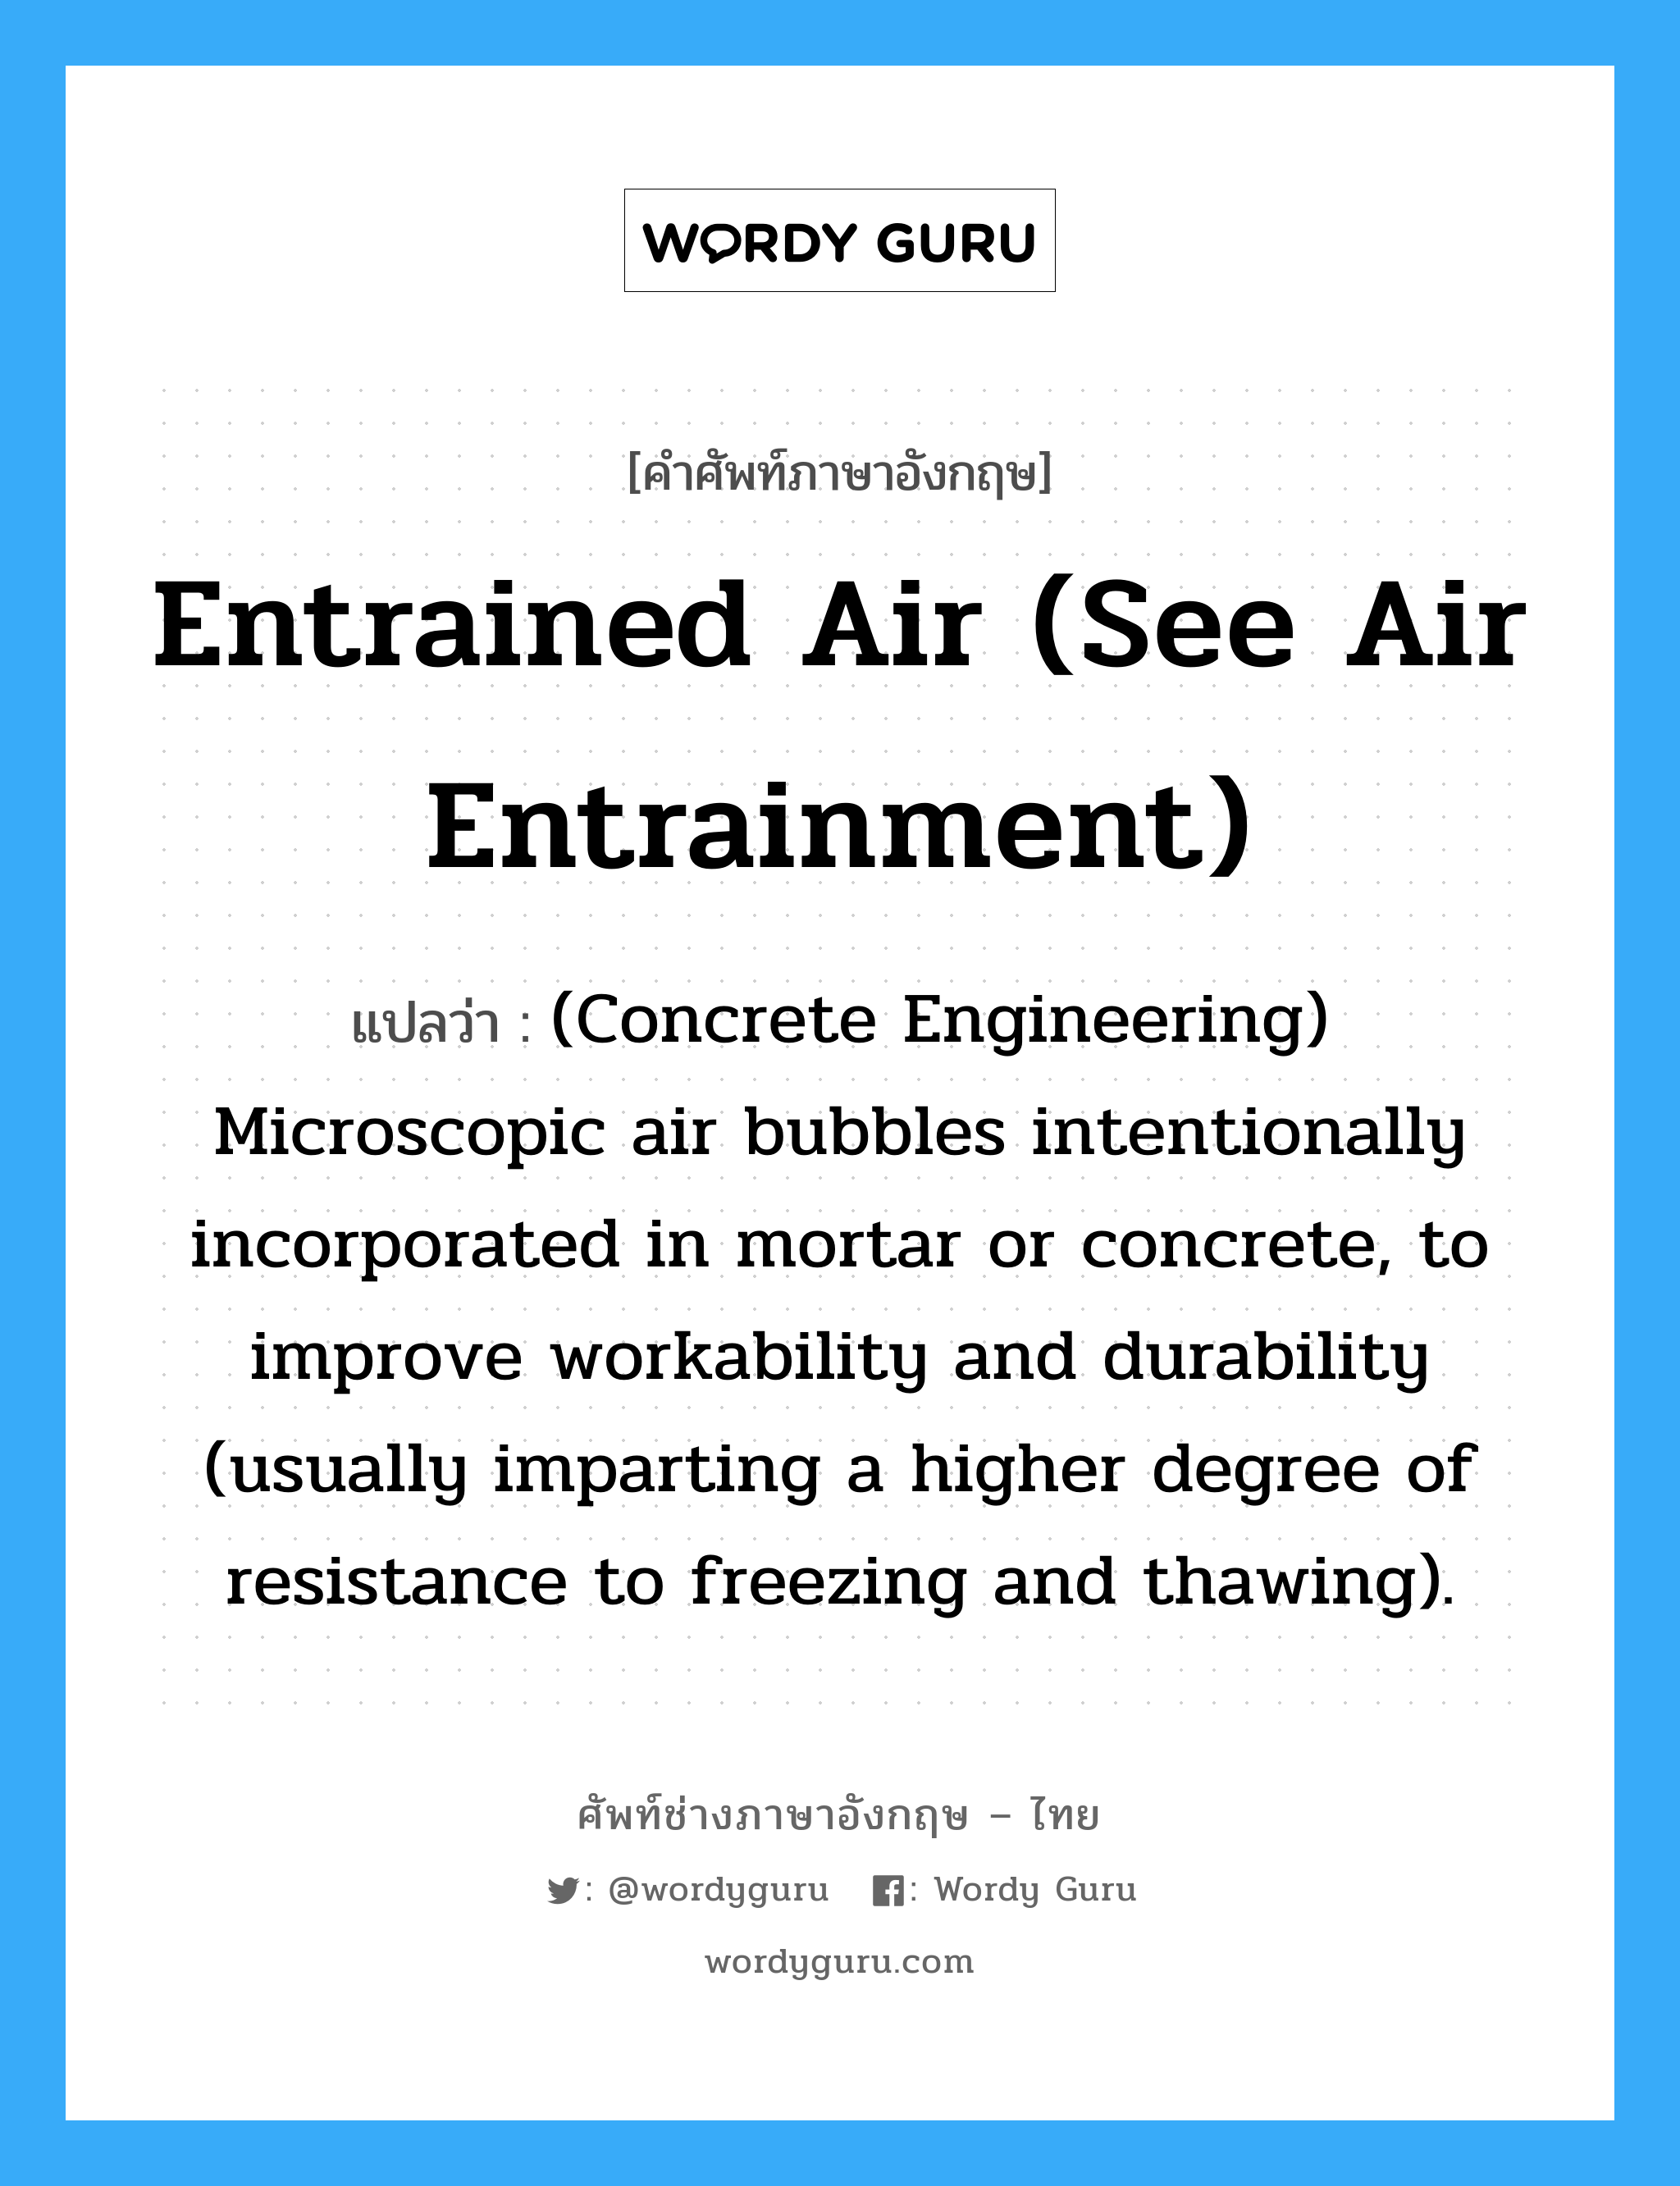 Entrained Air (See air entrainment) แปลว่า?, คำศัพท์ช่างภาษาอังกฤษ - ไทย Entrained Air (See air entrainment) คำศัพท์ภาษาอังกฤษ Entrained Air (See air entrainment) แปลว่า (Concrete Engineering) Microscopic air bubbles intentionally incorporated in mortar or concrete, to improve workability and durability (usually imparting a higher degree of resistance to freezing and thawing).